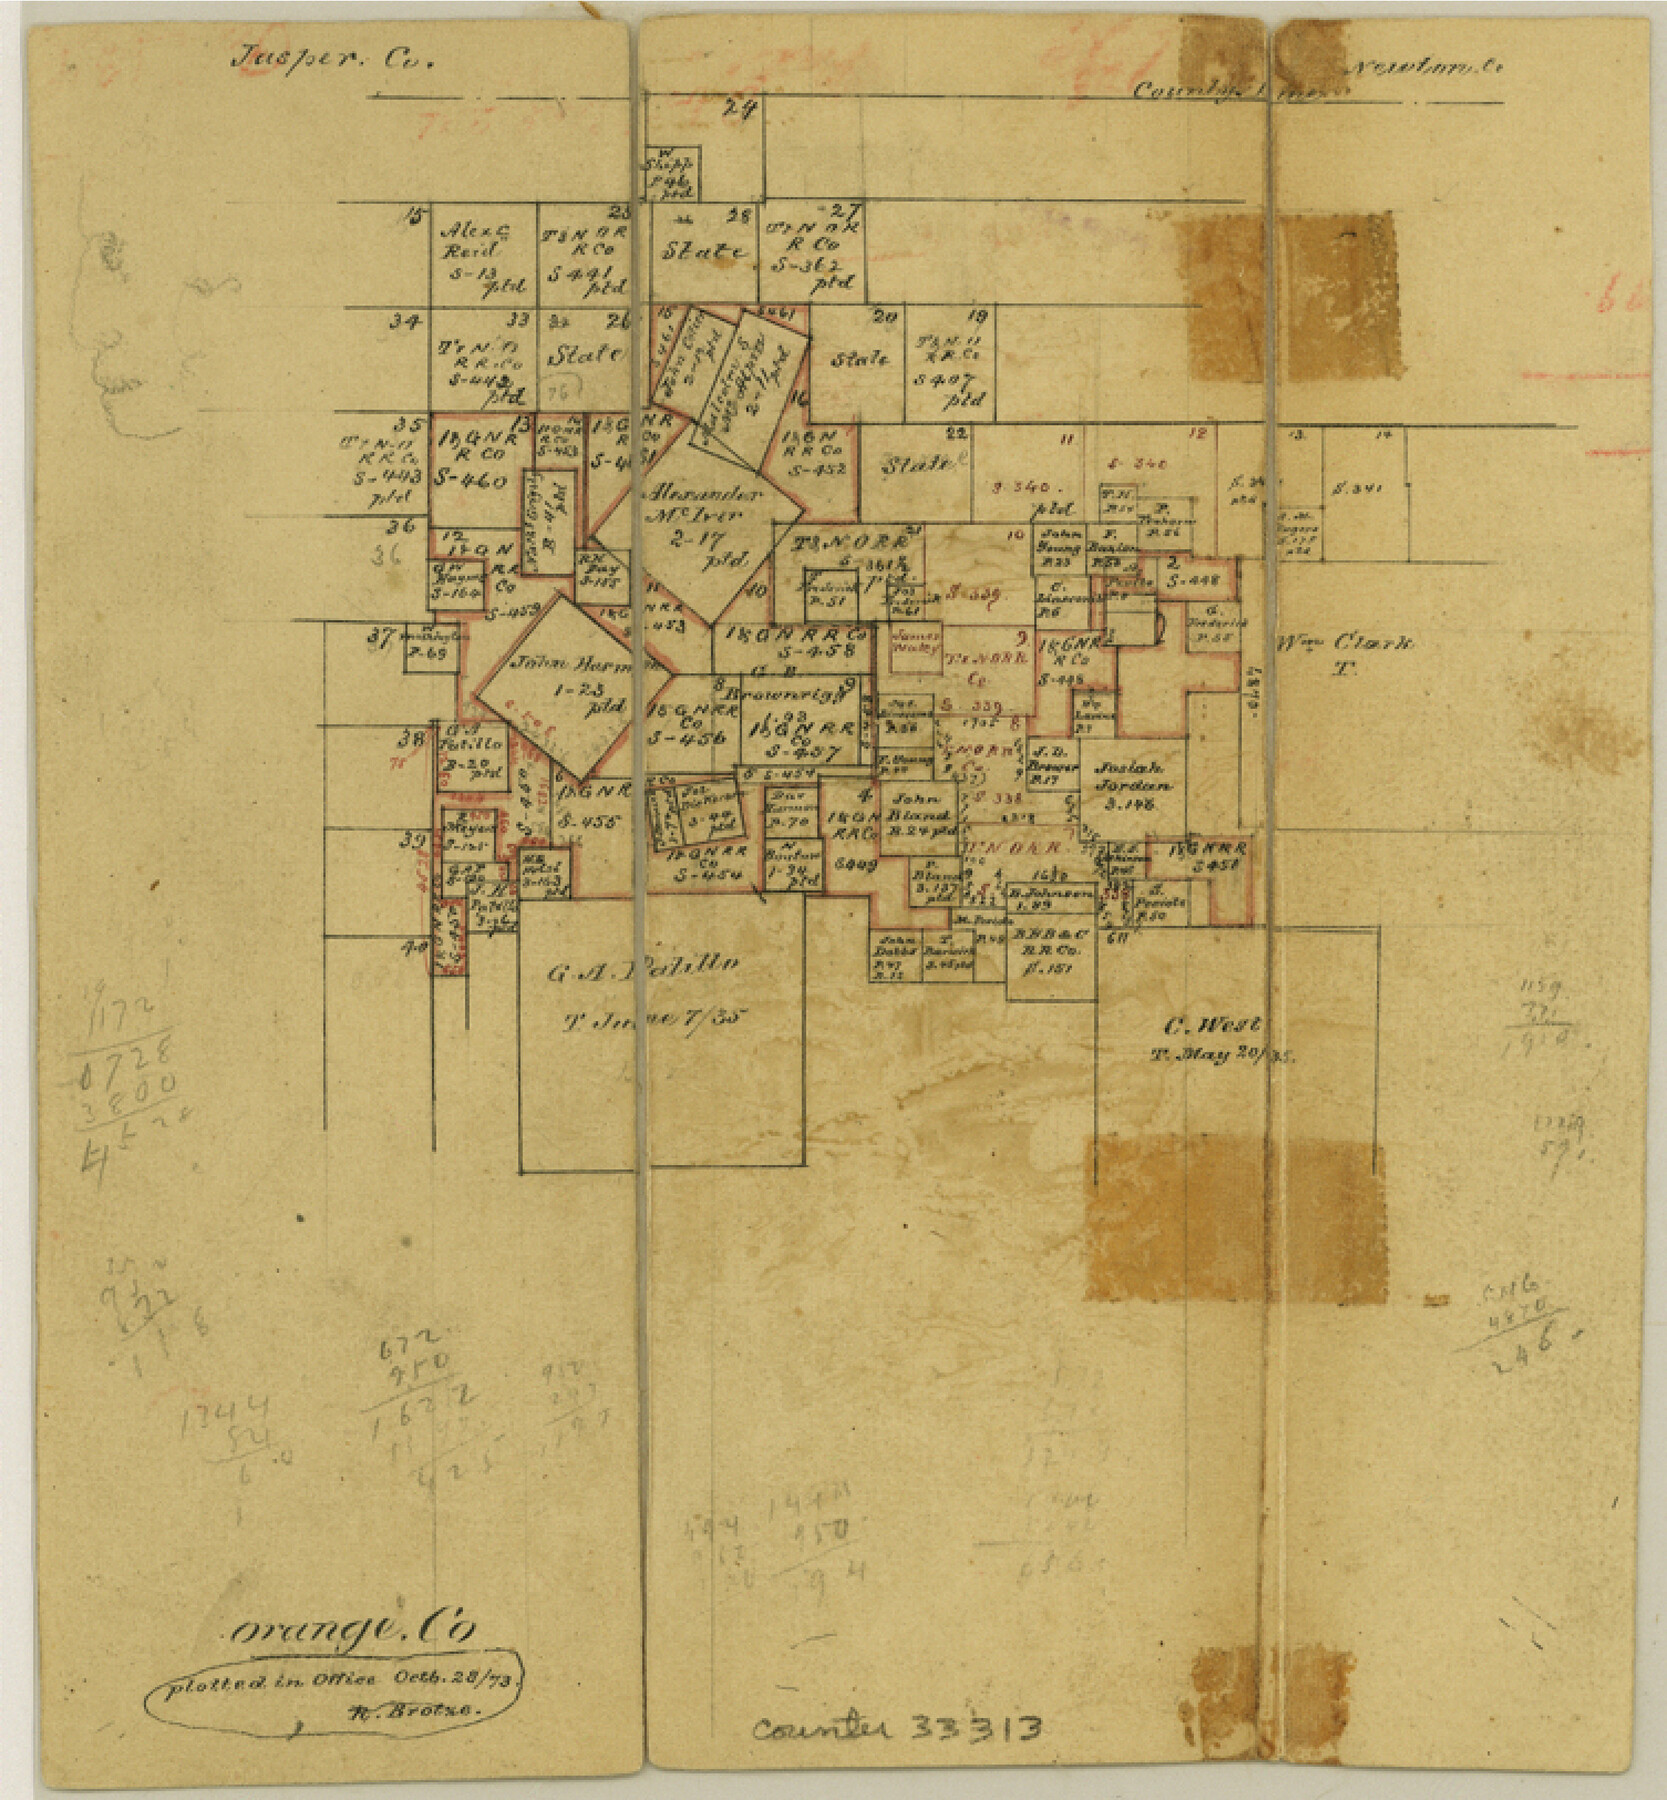 33313, Orange County Sketch File 9a, General Map Collection